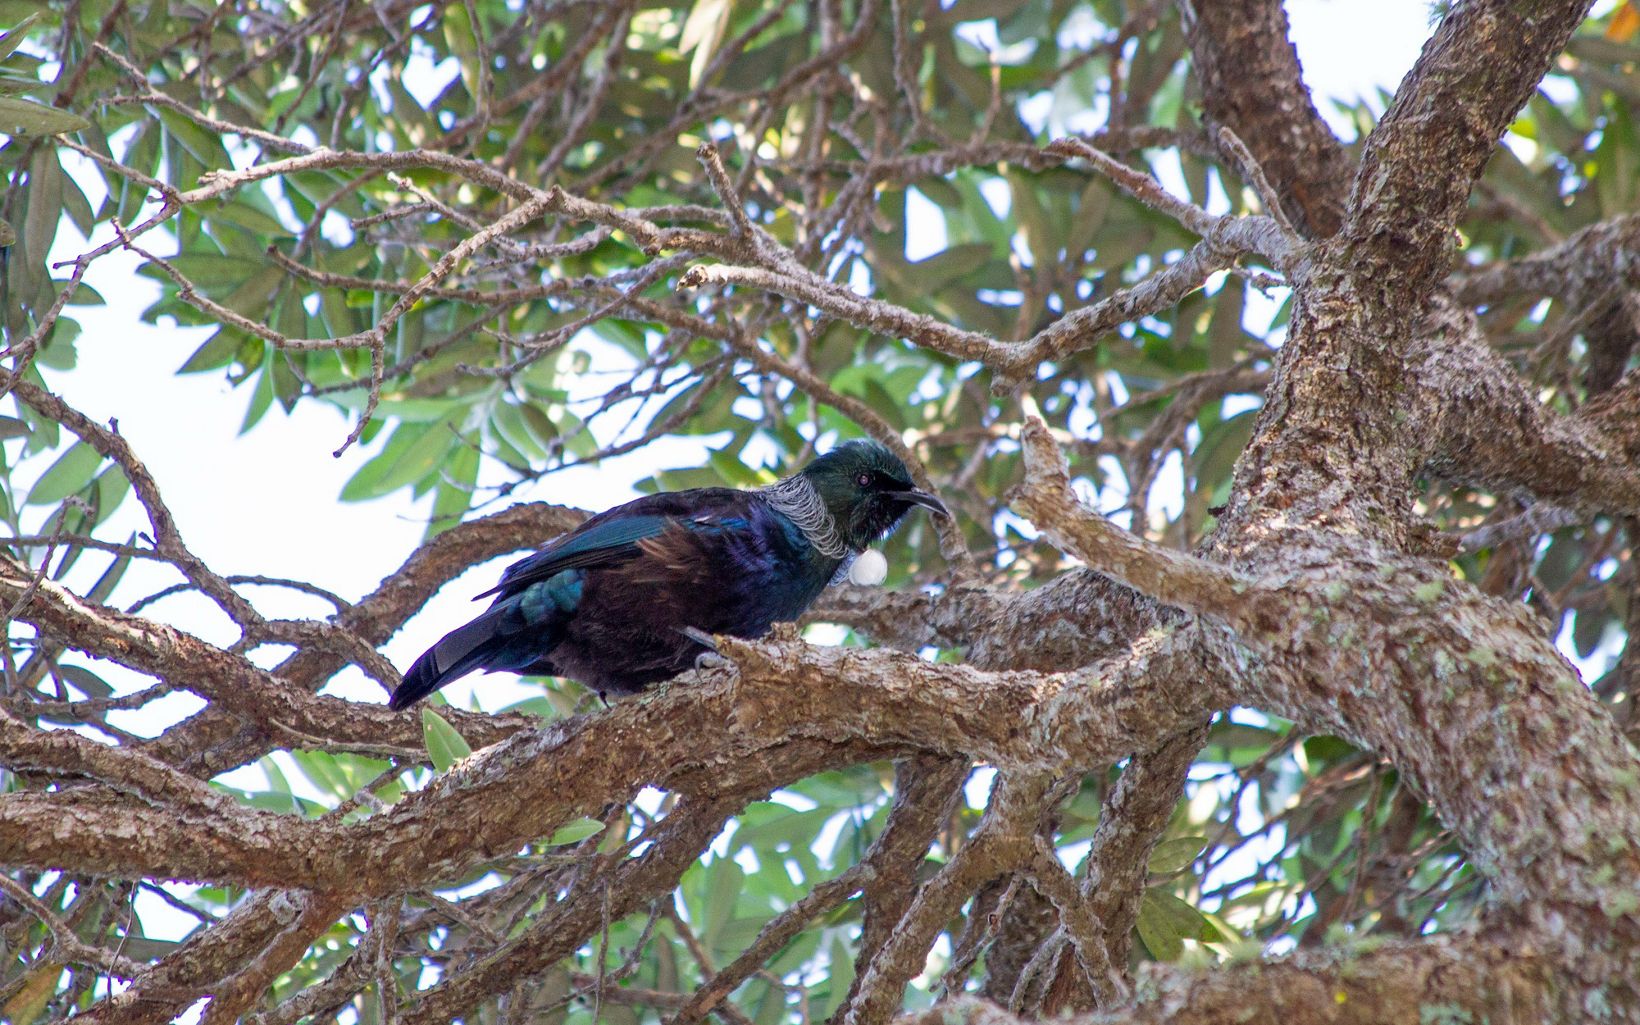 Tui An endemic species that can be found throughout Aotearoa New Zealand, the Tui can imitate sound much like a parrot and has two small white tufts of feathers at its neck. © Ethan Kearns/The Nature Conservancy